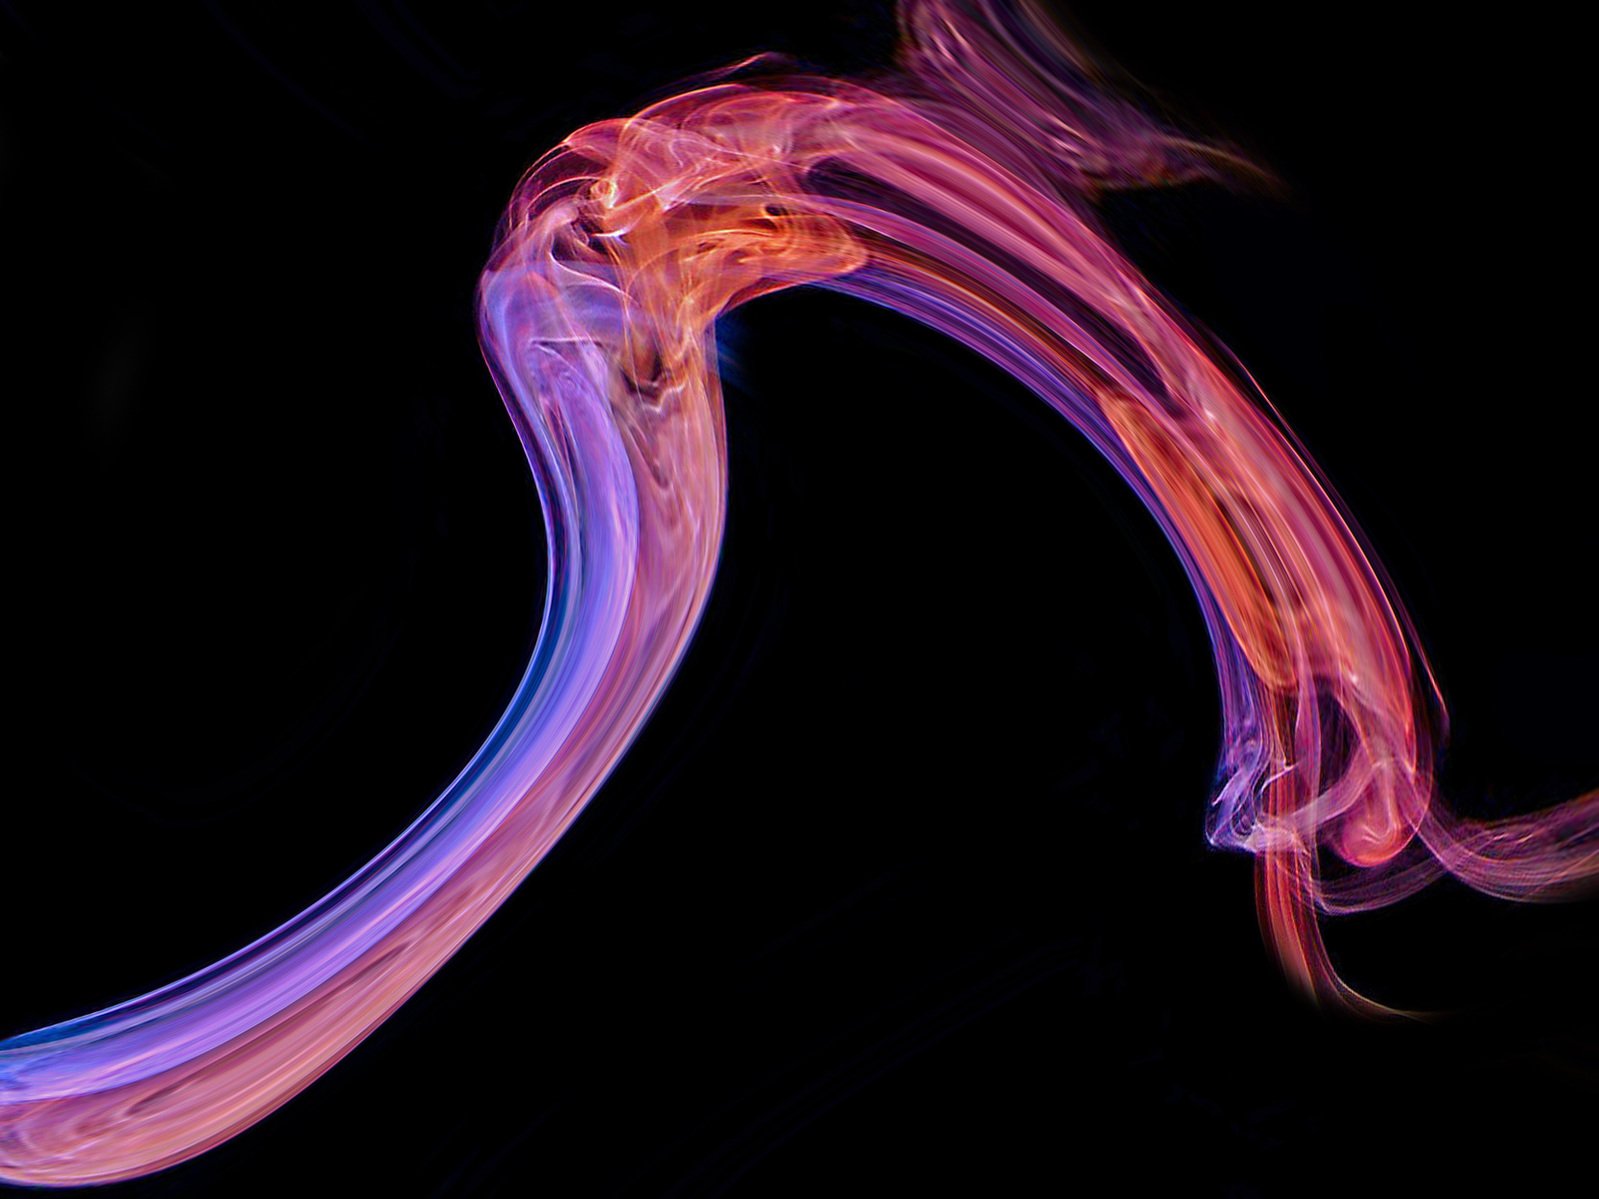 long exposure pograph of bright pink smoke against black background